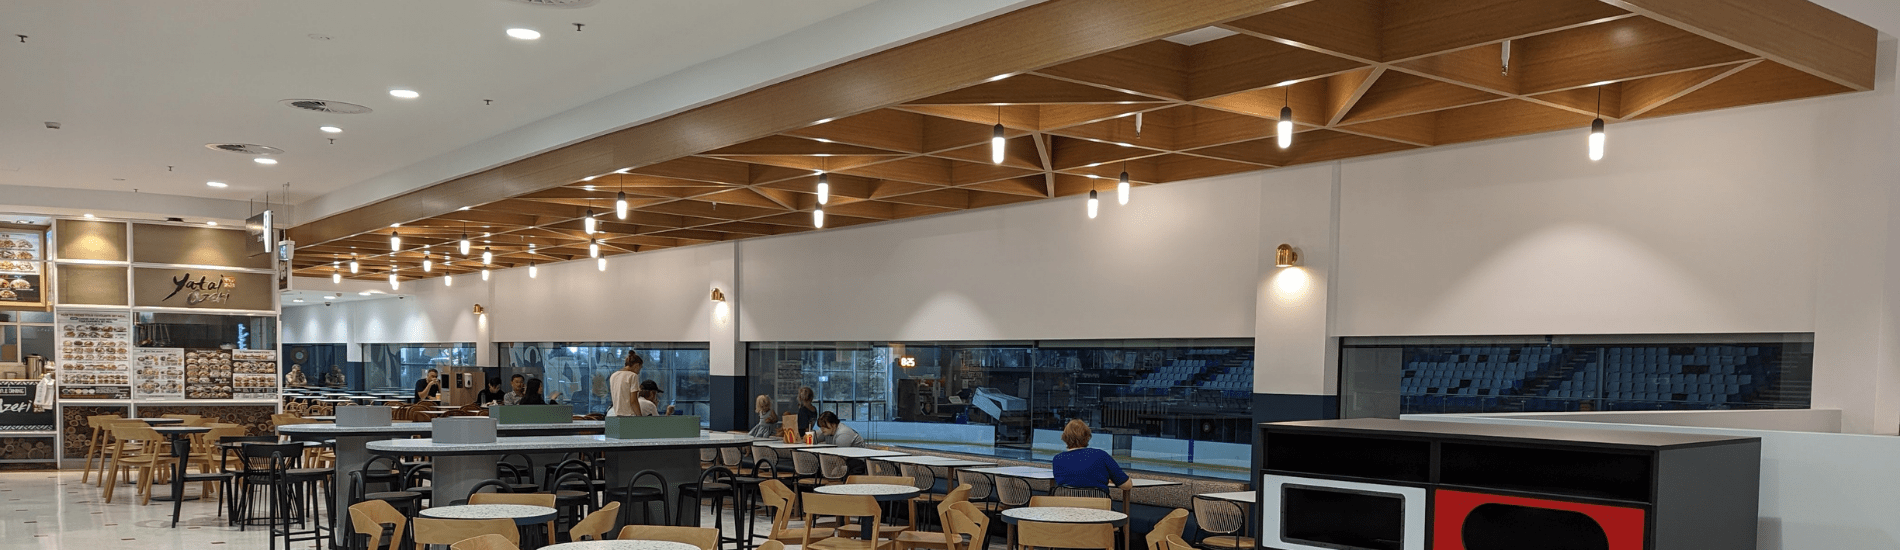 Eye-catching used of criss cross beams to define seating areas of a food court